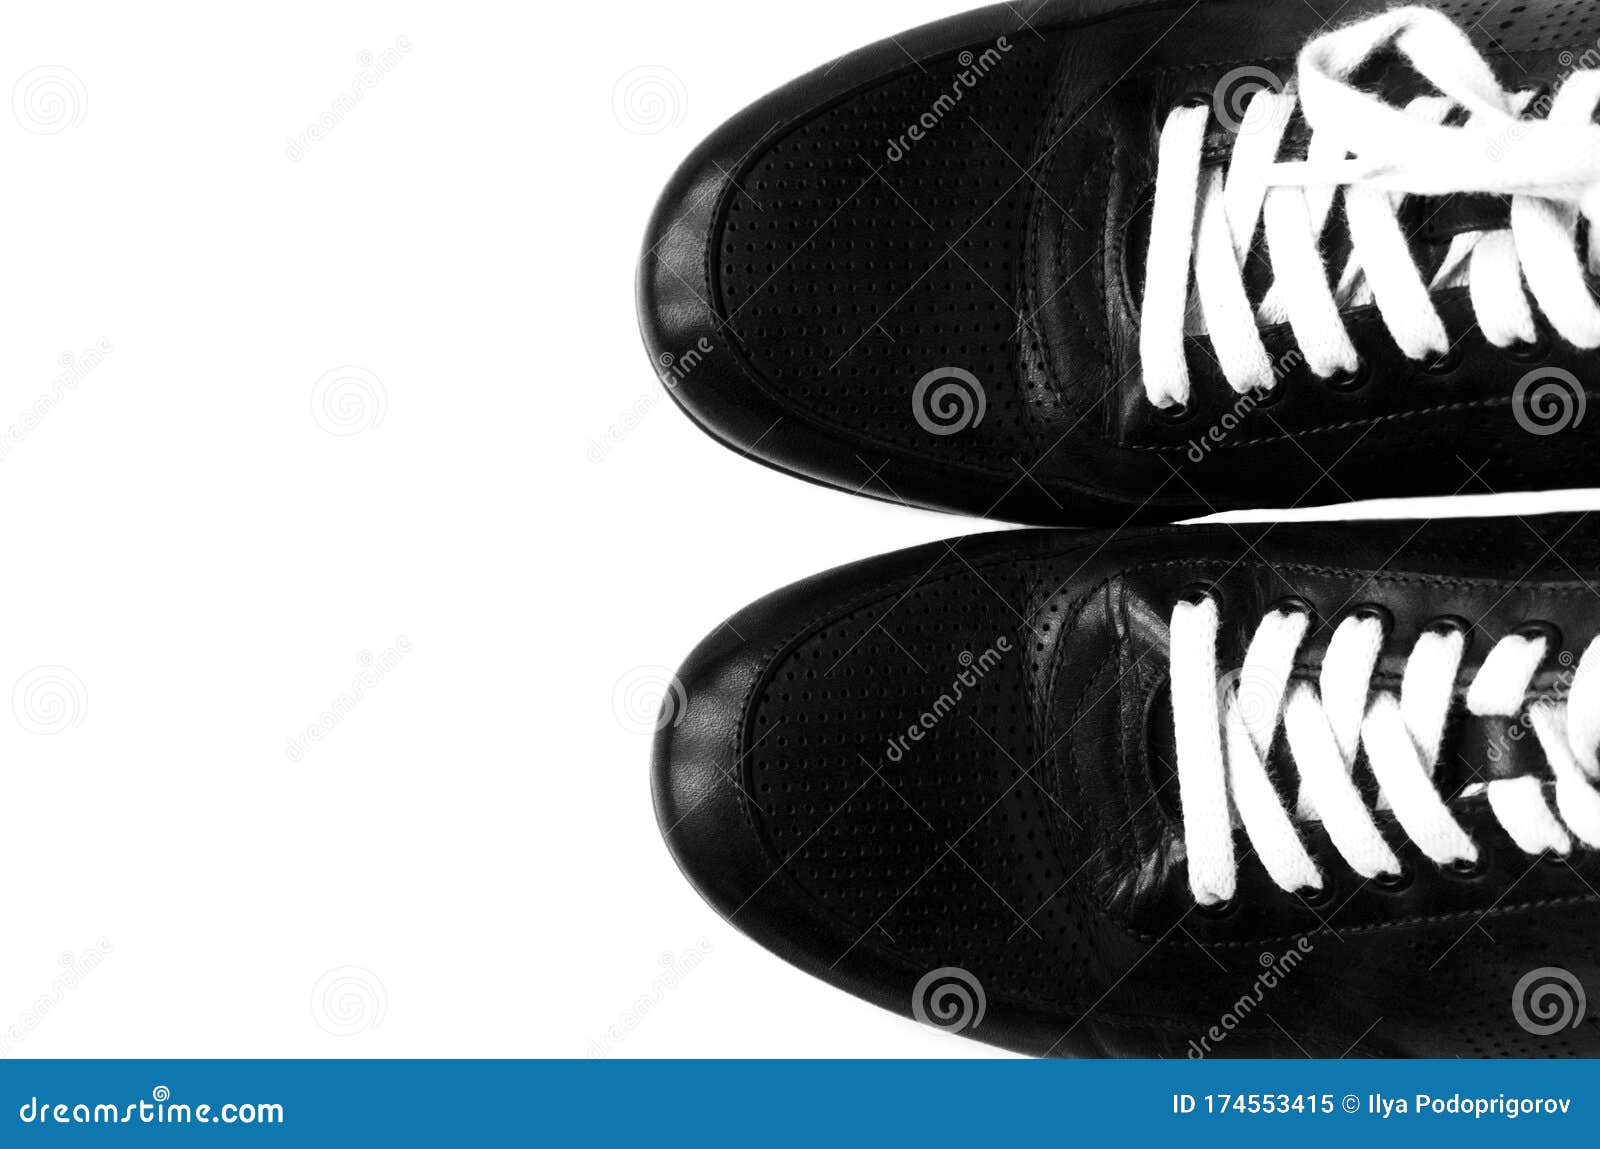 Black Sneakers on a White Background, Black Shoes with White Laces ...